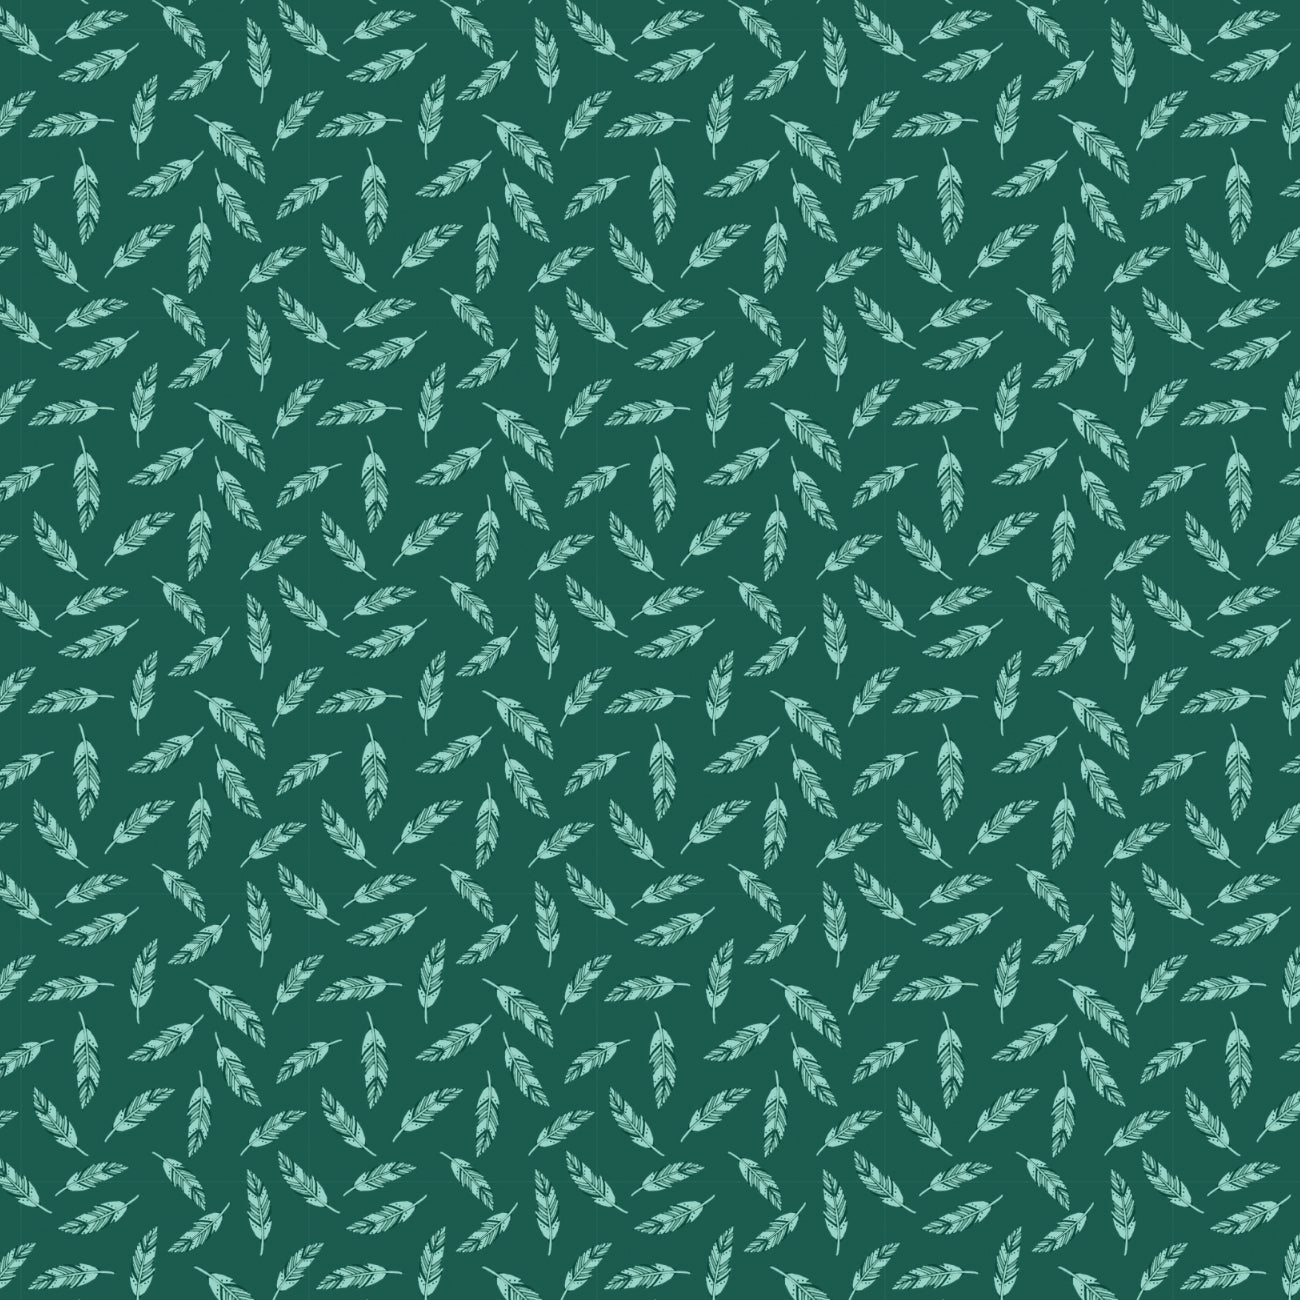 Rhapsody Collection-Feathers-Teal-100% Cotton 21240105-01